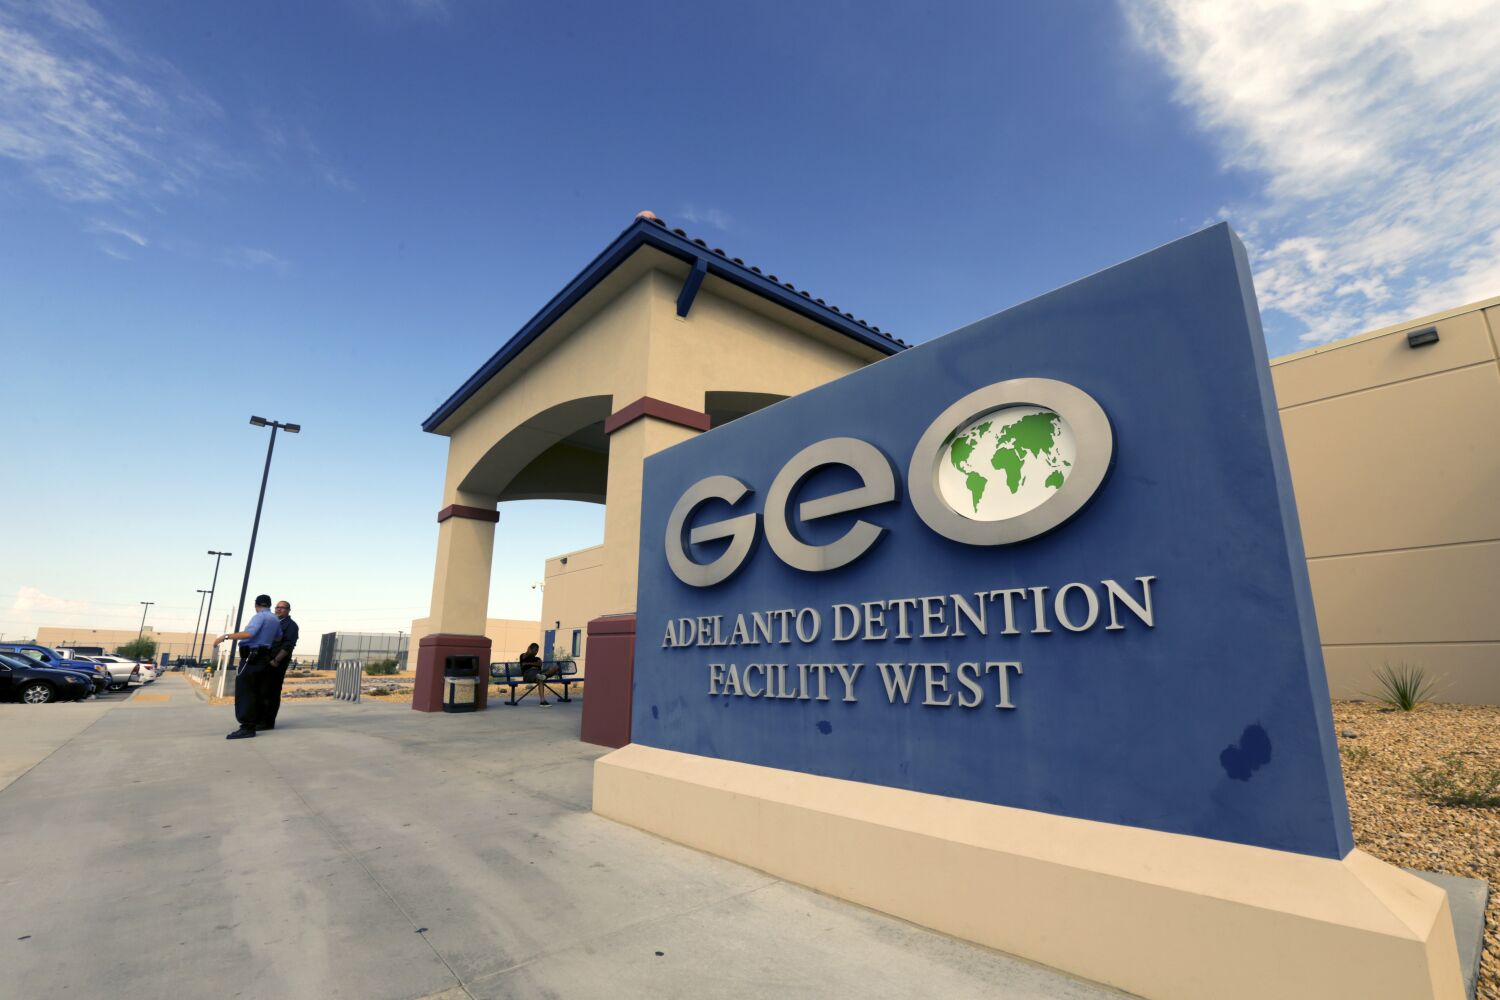 California tried and failed to ban for-profit ICE detention centers. What does that mean for other states?